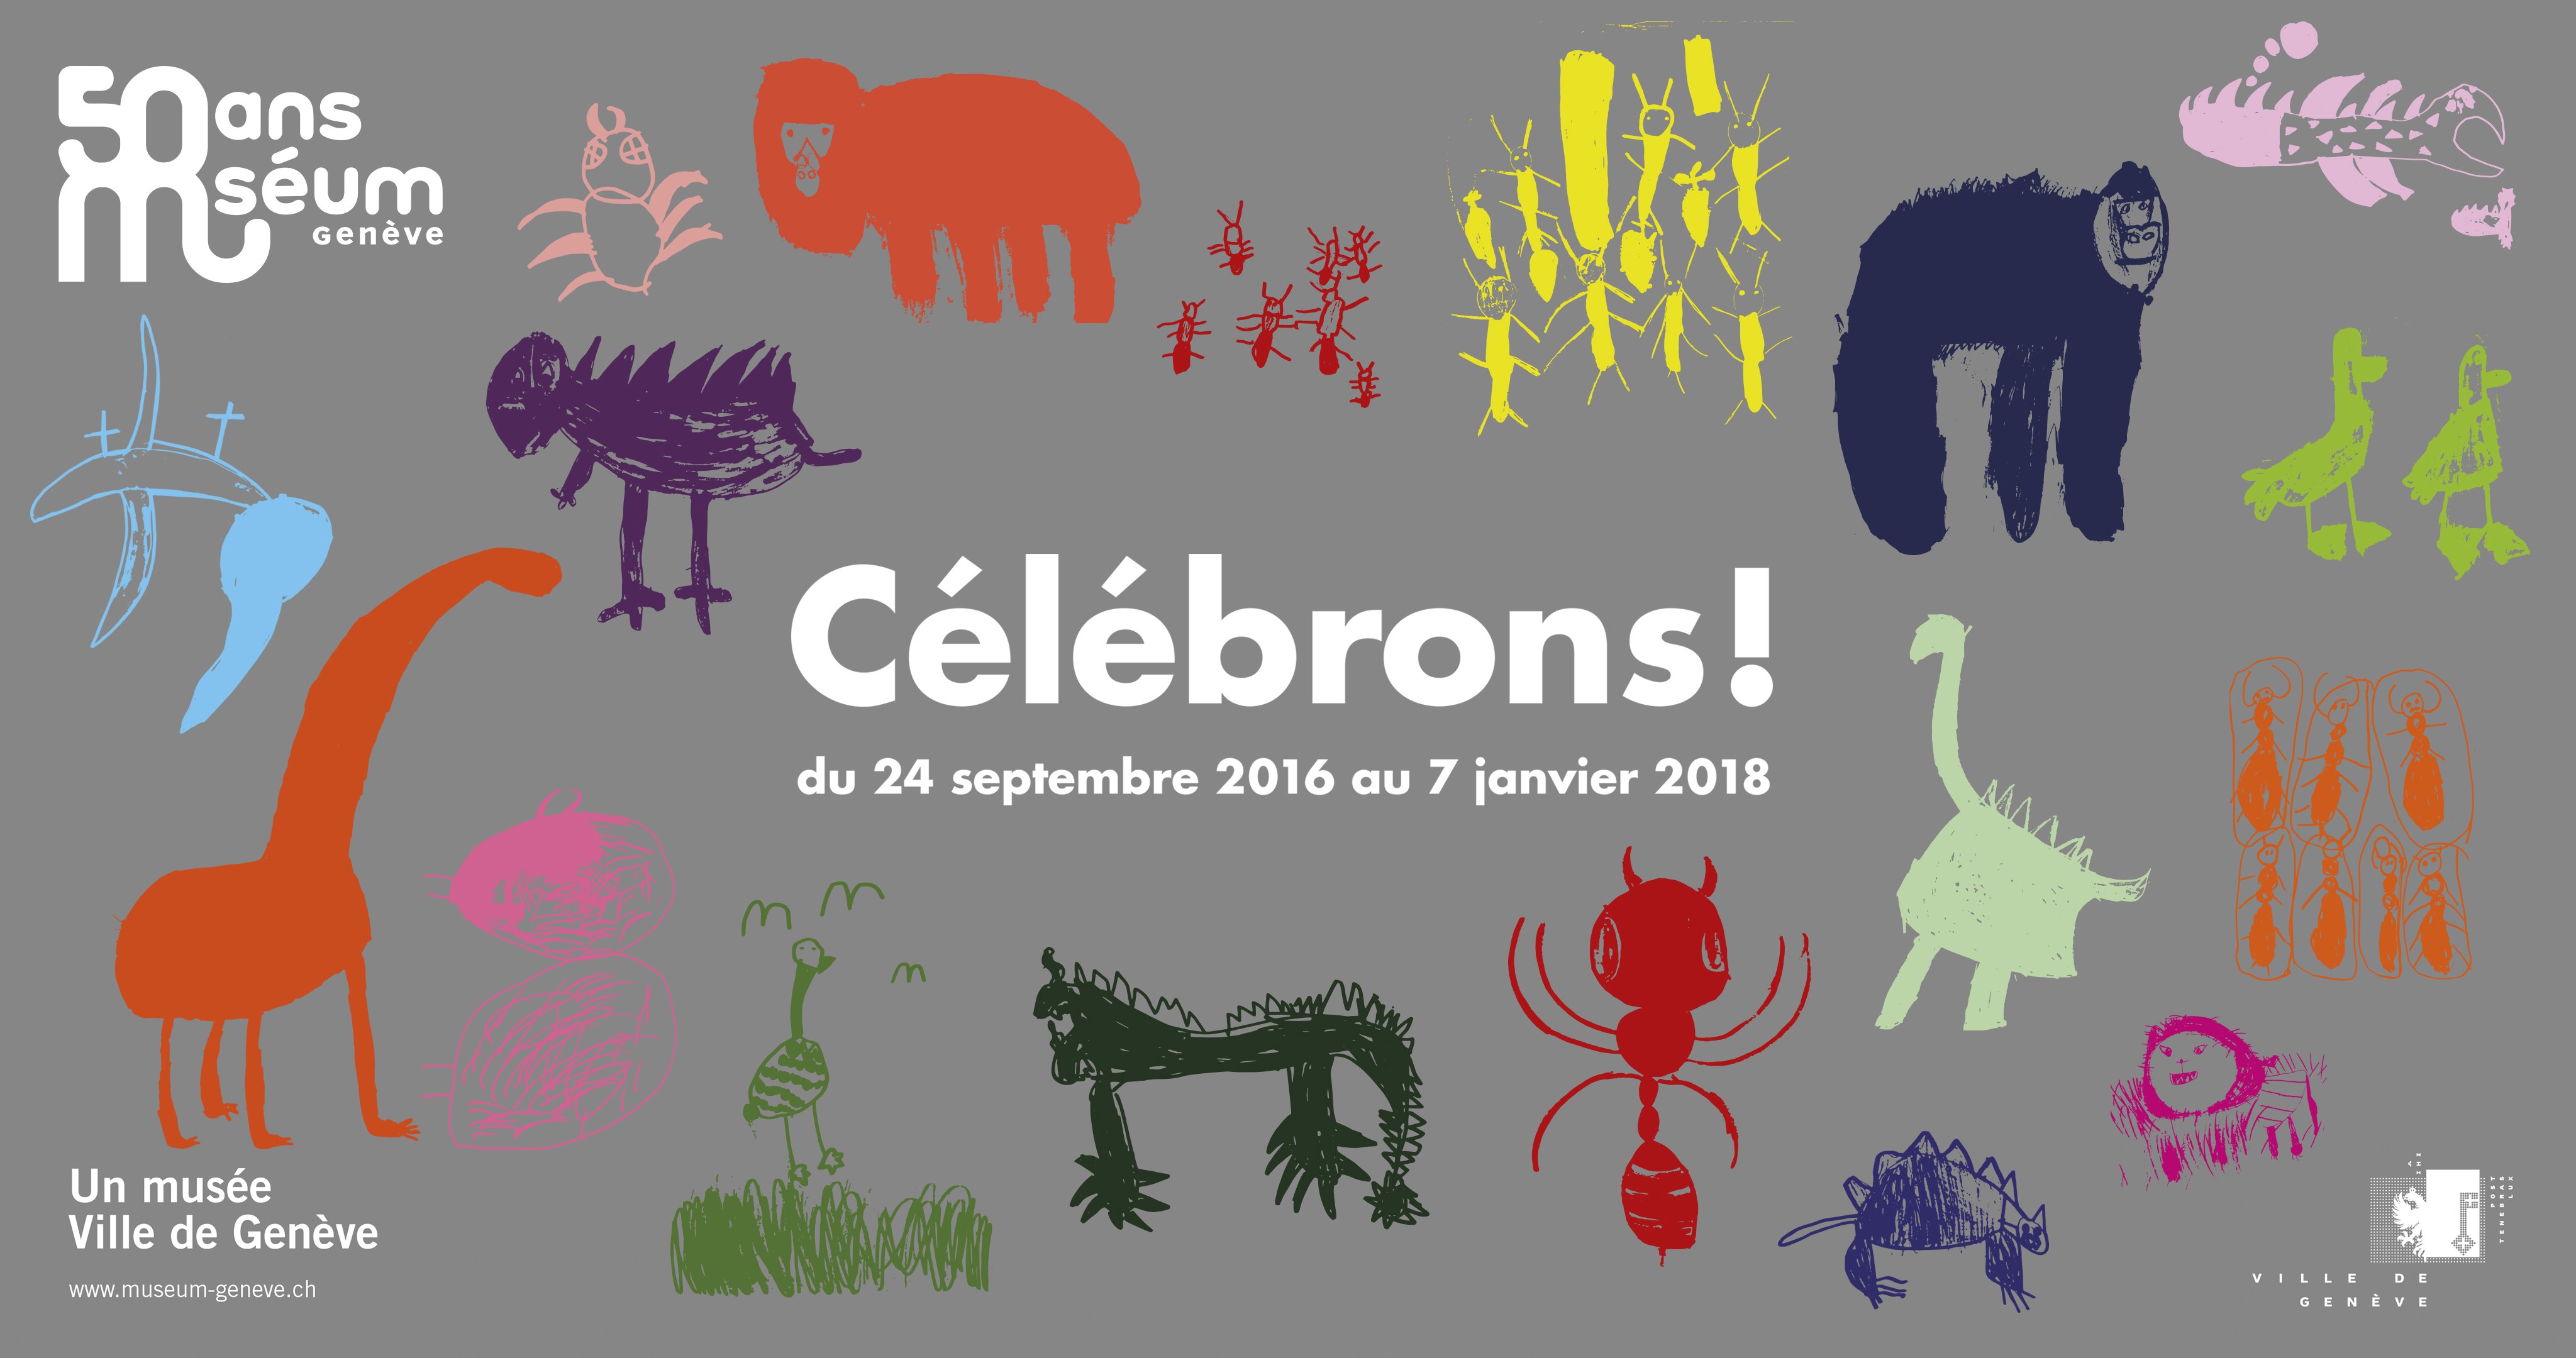 Geneva Natural History Museum - poster celebrating 50 year anniversary on current site, designed by children